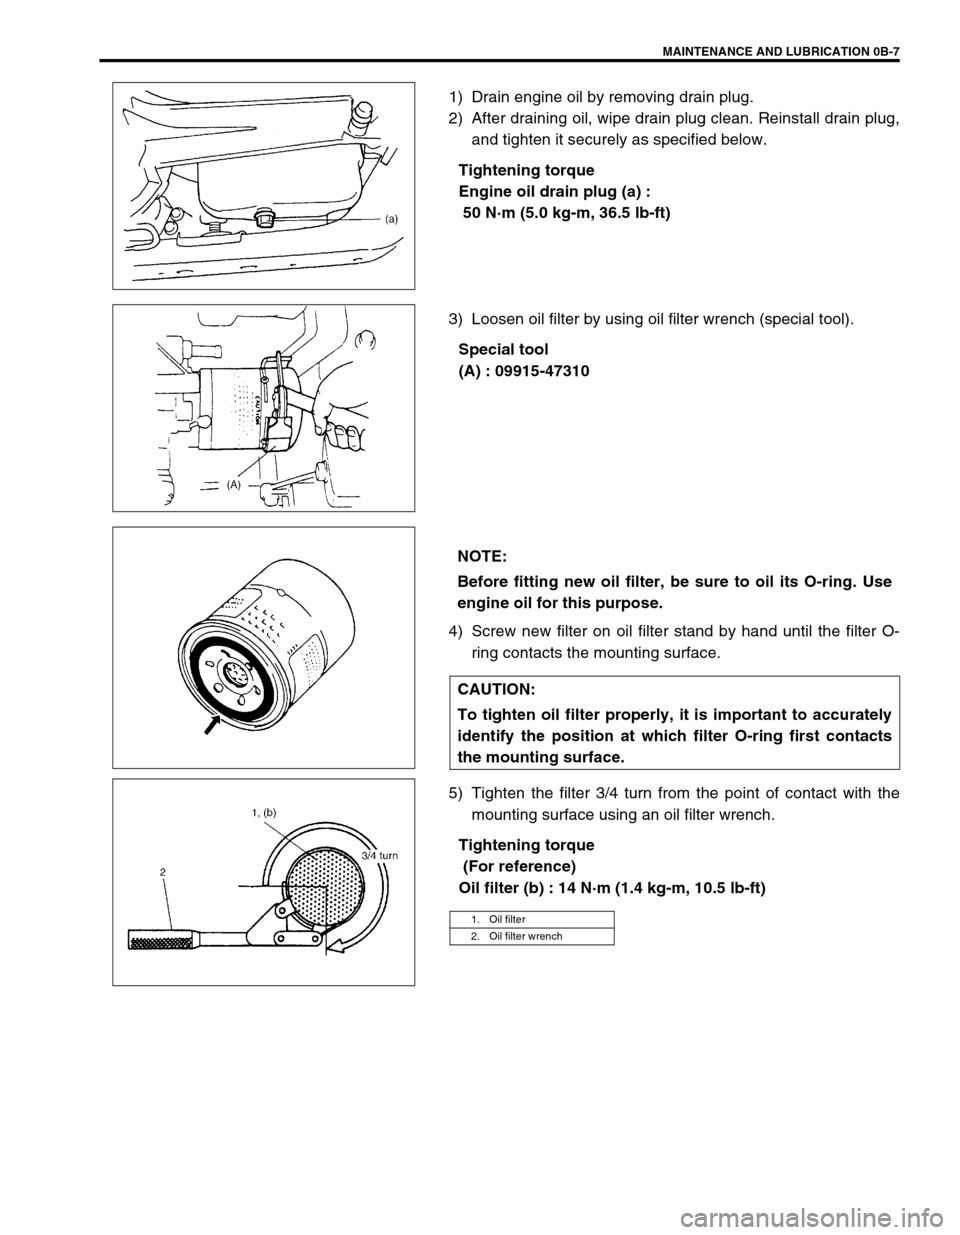 SUZUKI GRAND VITARA 1999 2.G User Guide MAINTENANCE AND LUBRICATION 0B-7
1) Drain engine oil by removing drain plug.
2) After draining oil, wipe drain plug clean. Reinstall drain plug,
and tighten it securely as specified below.
Tightening 